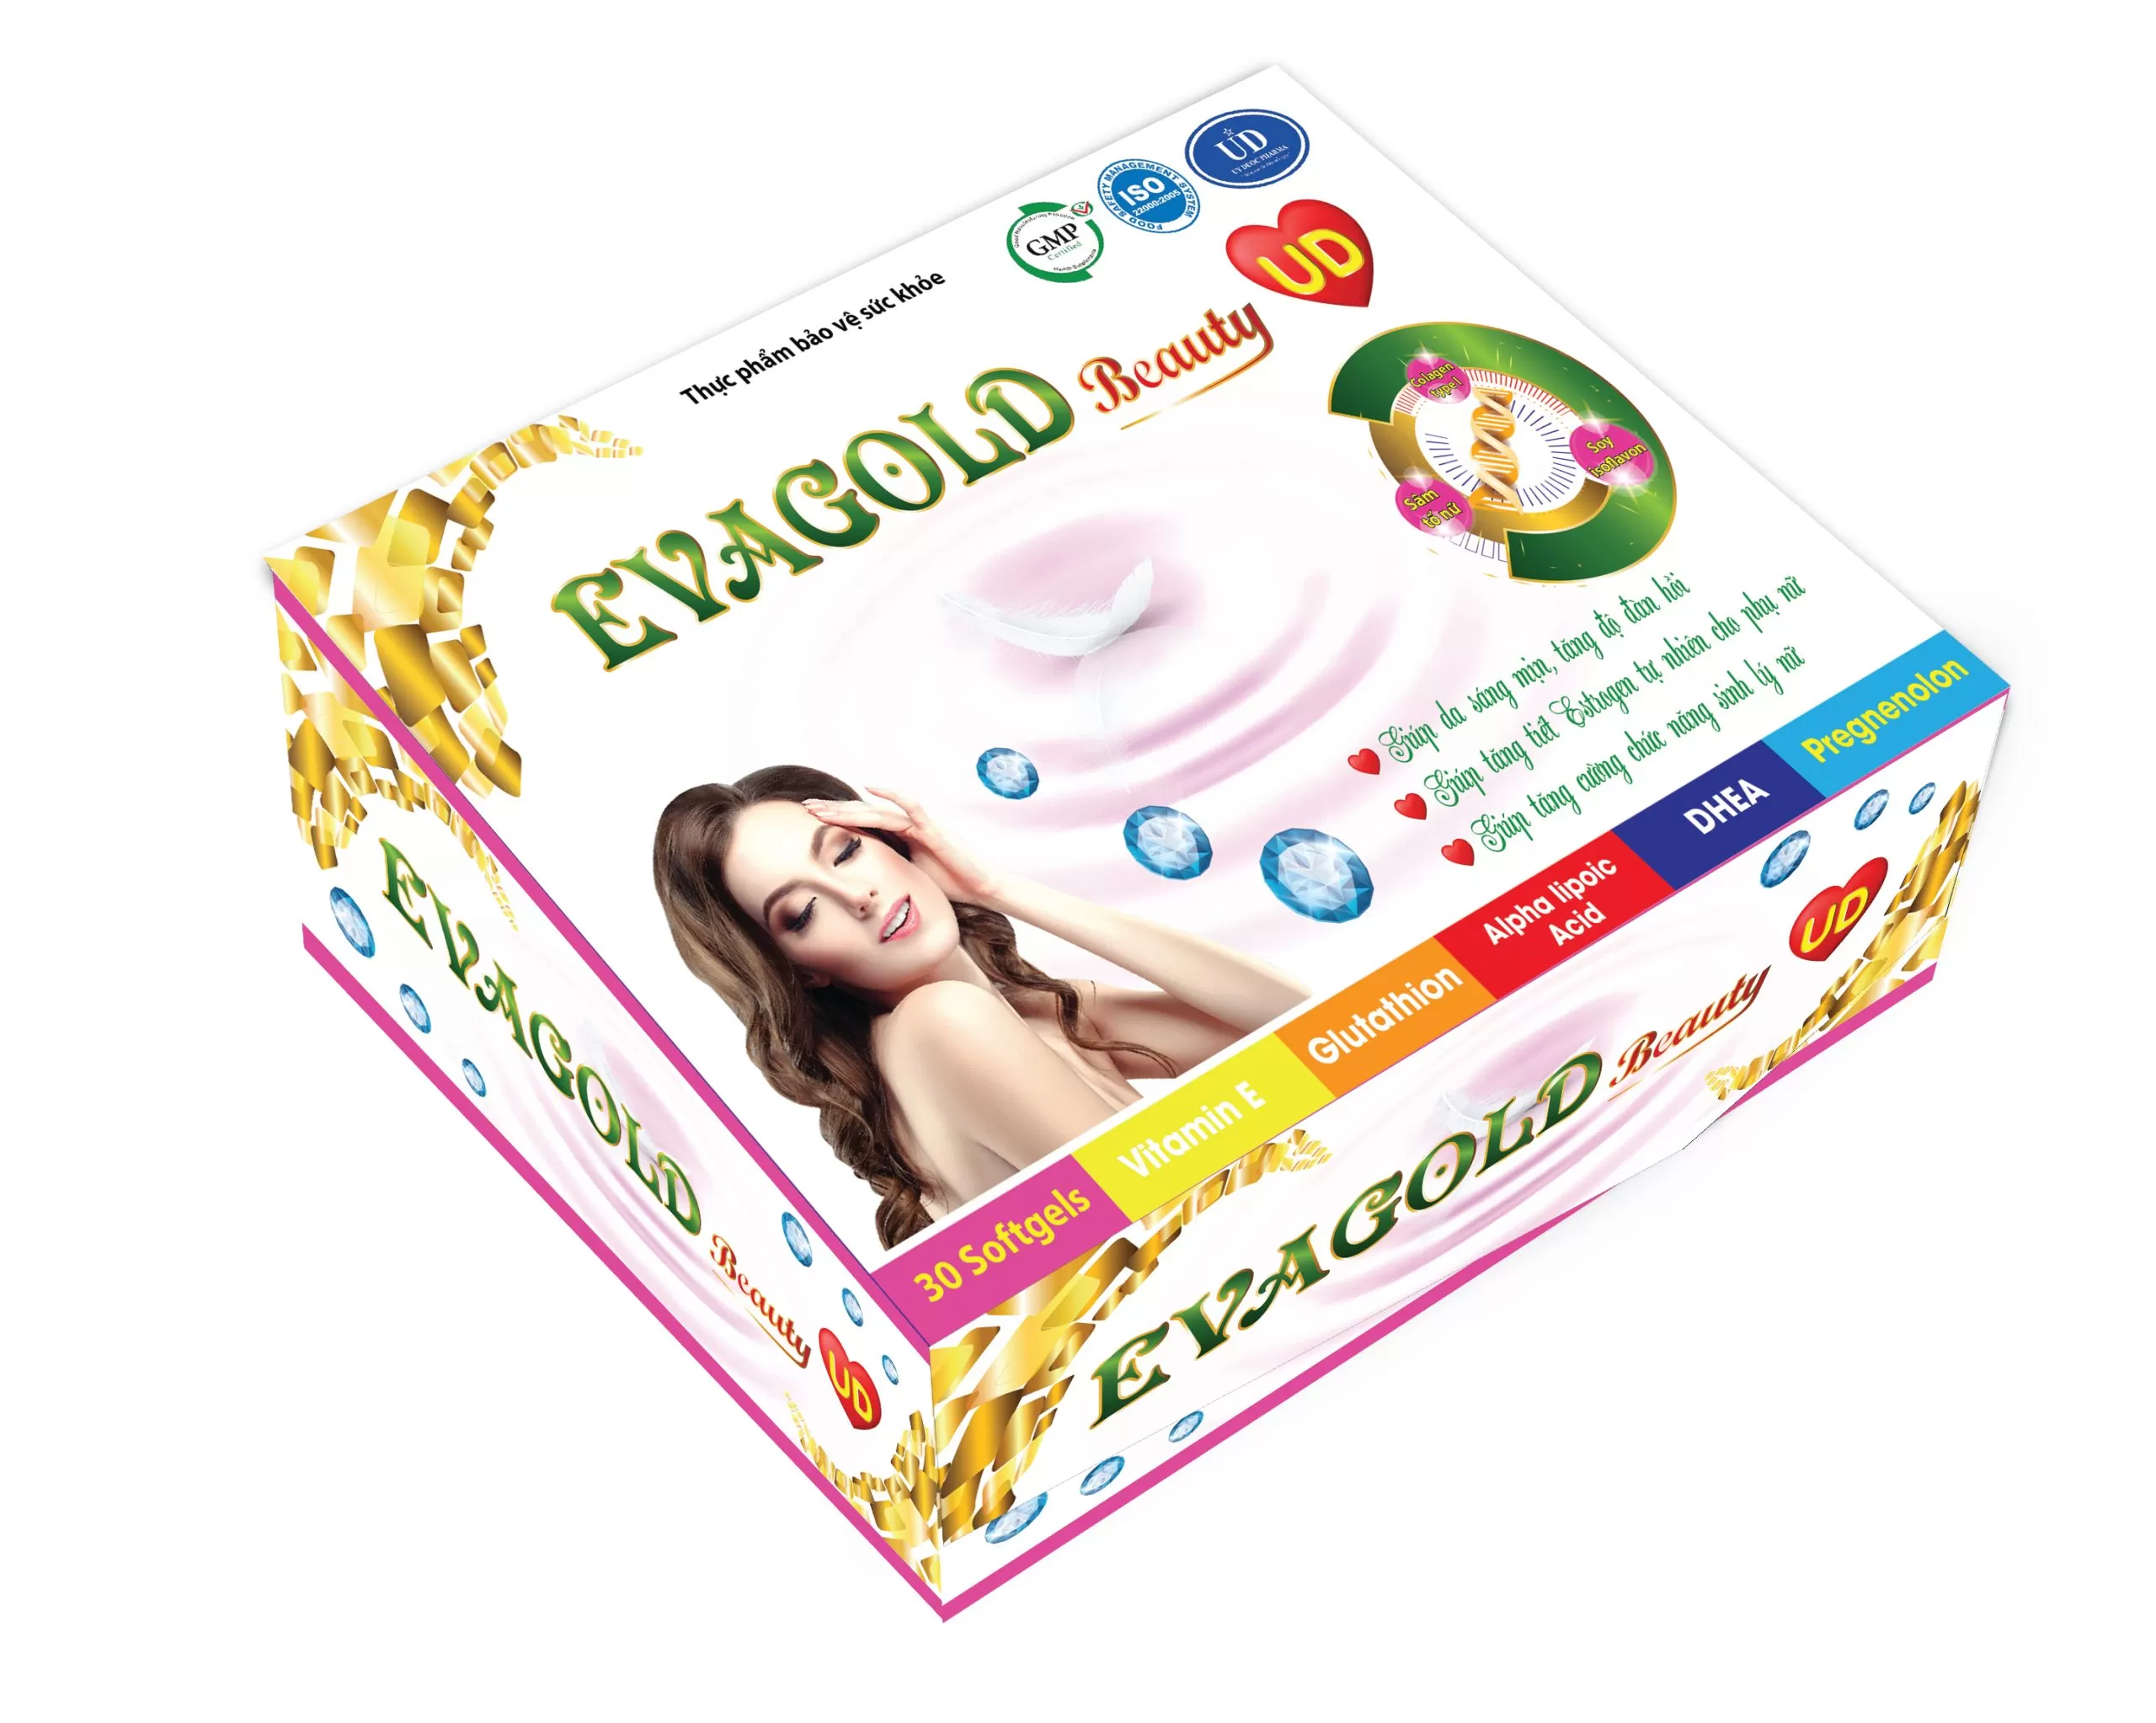 Evagold beauty ud-01-02-01-02-03-03-03-03-03-03-02-01-02-01-01-02-02